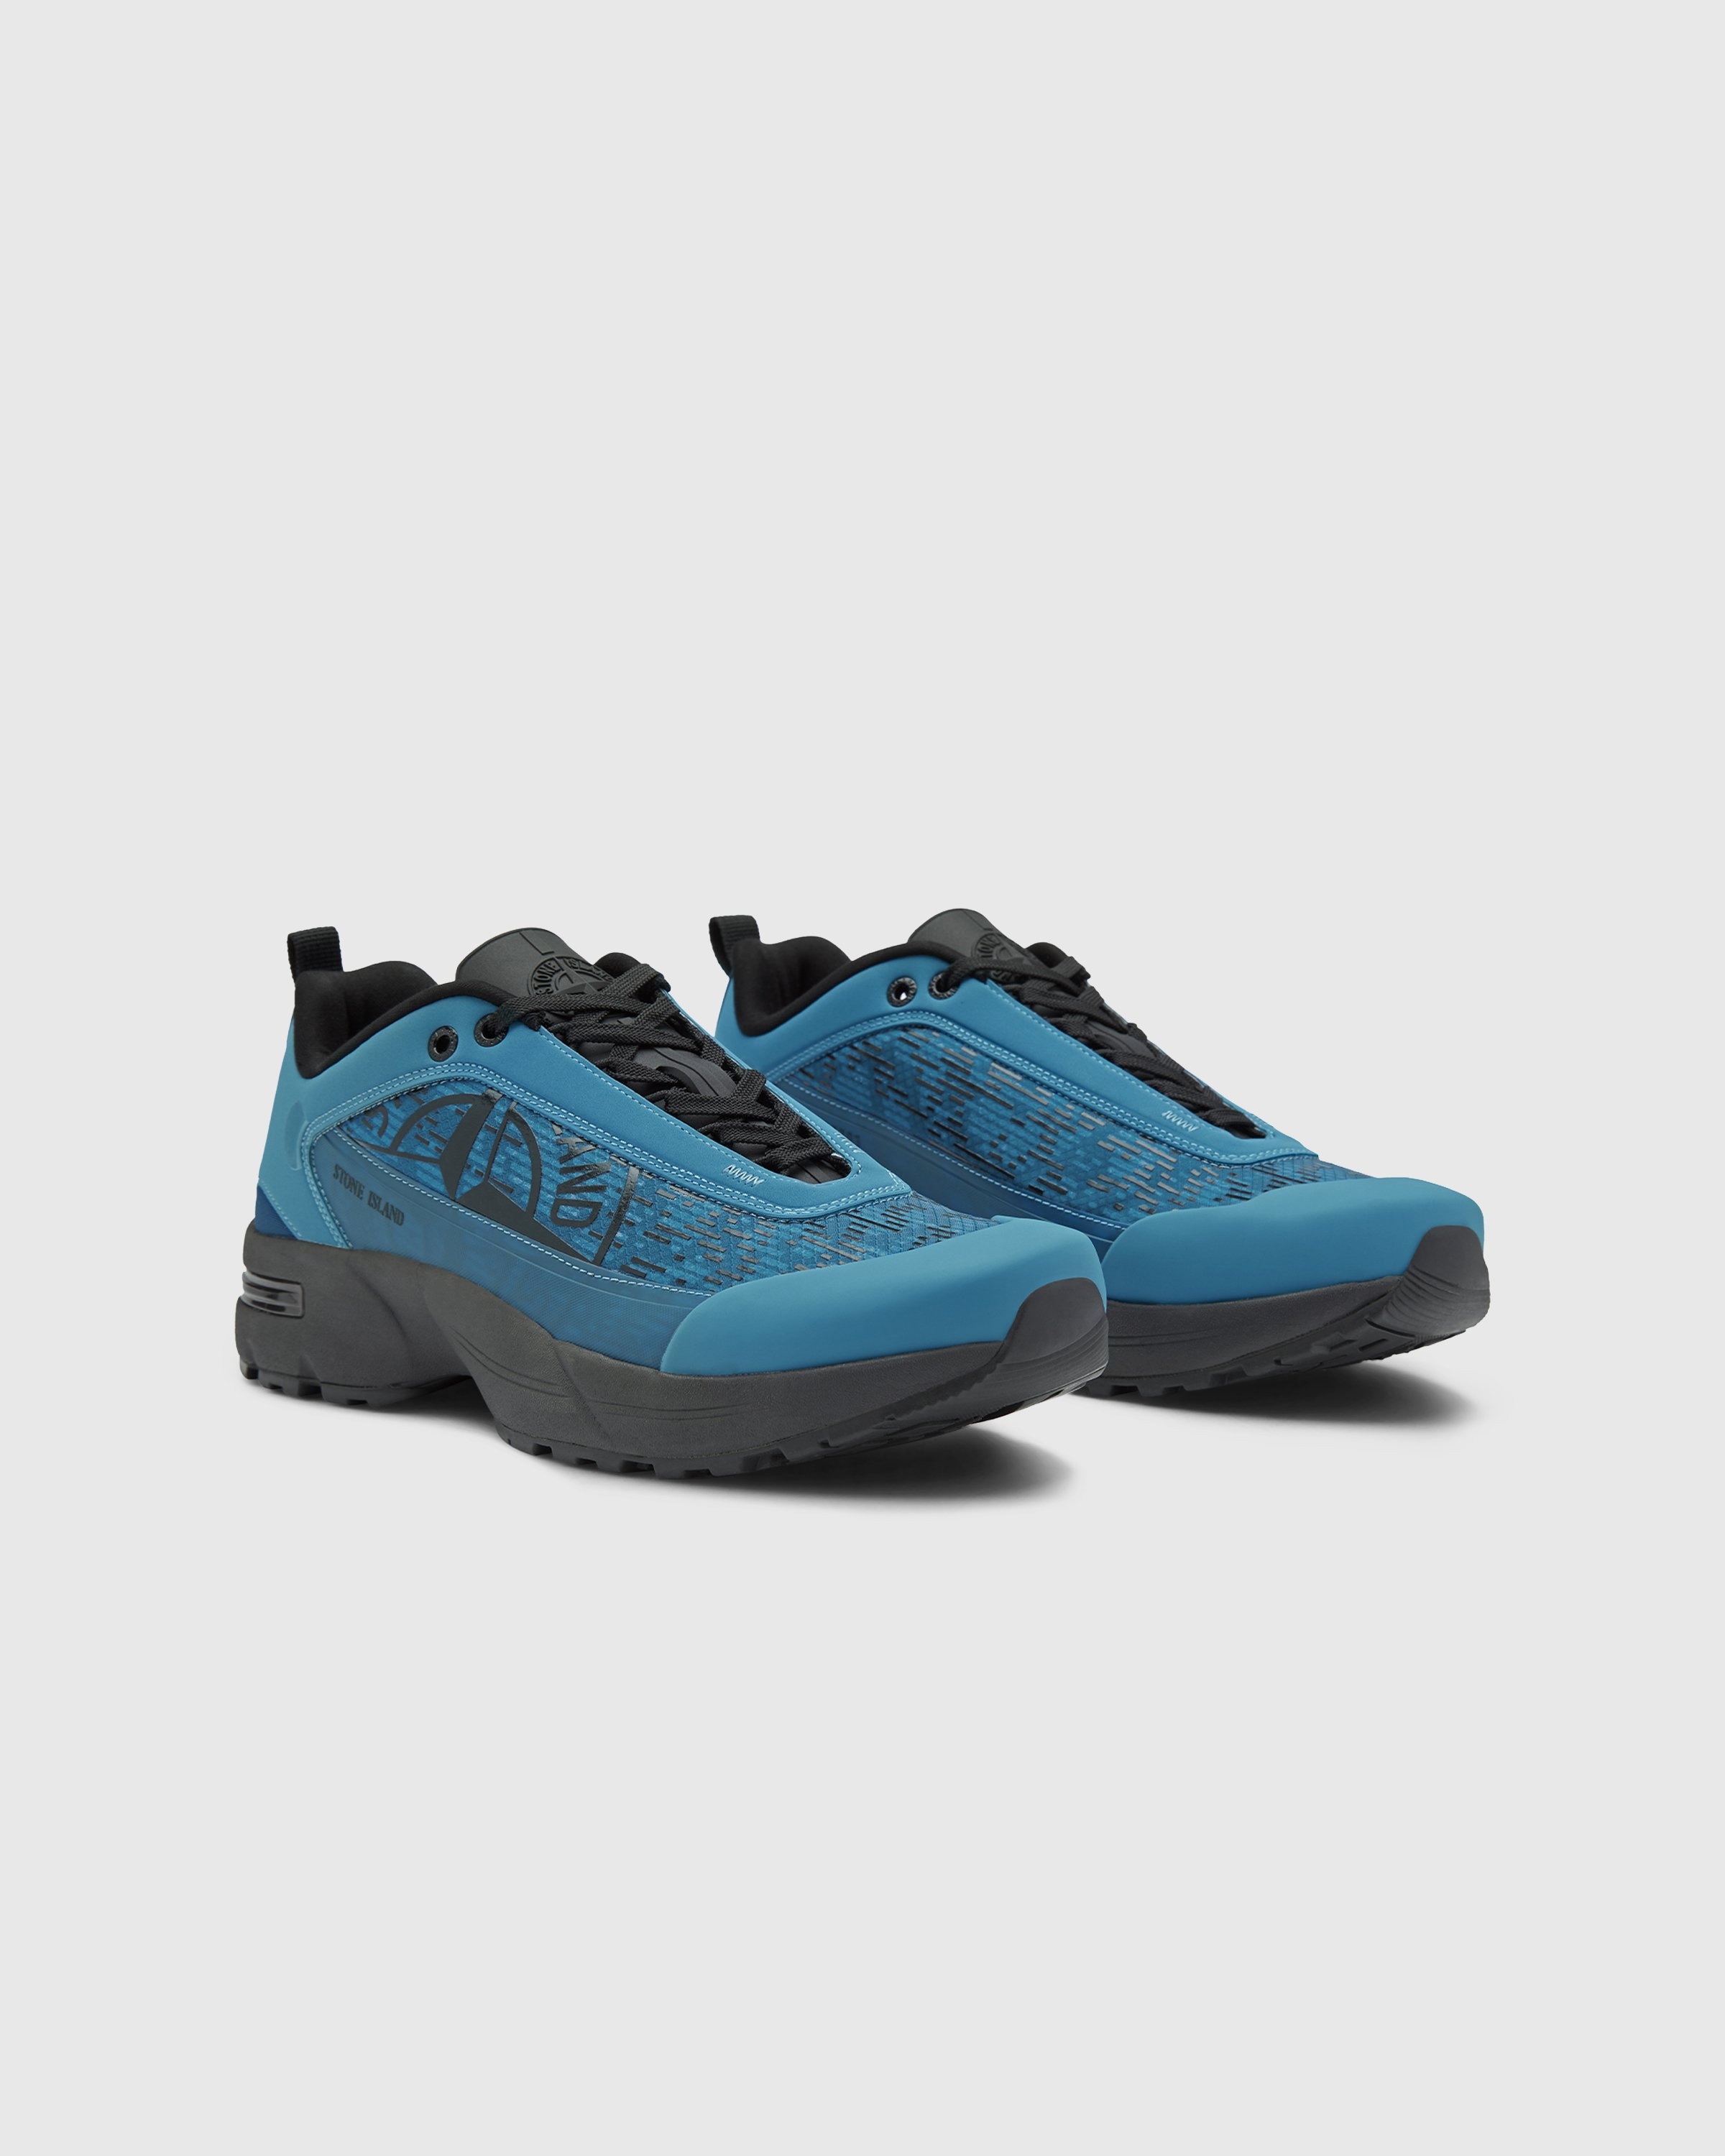 Stone Island – Grime Turquoise 78FWS033 - Sneakers - Blue - Image 2